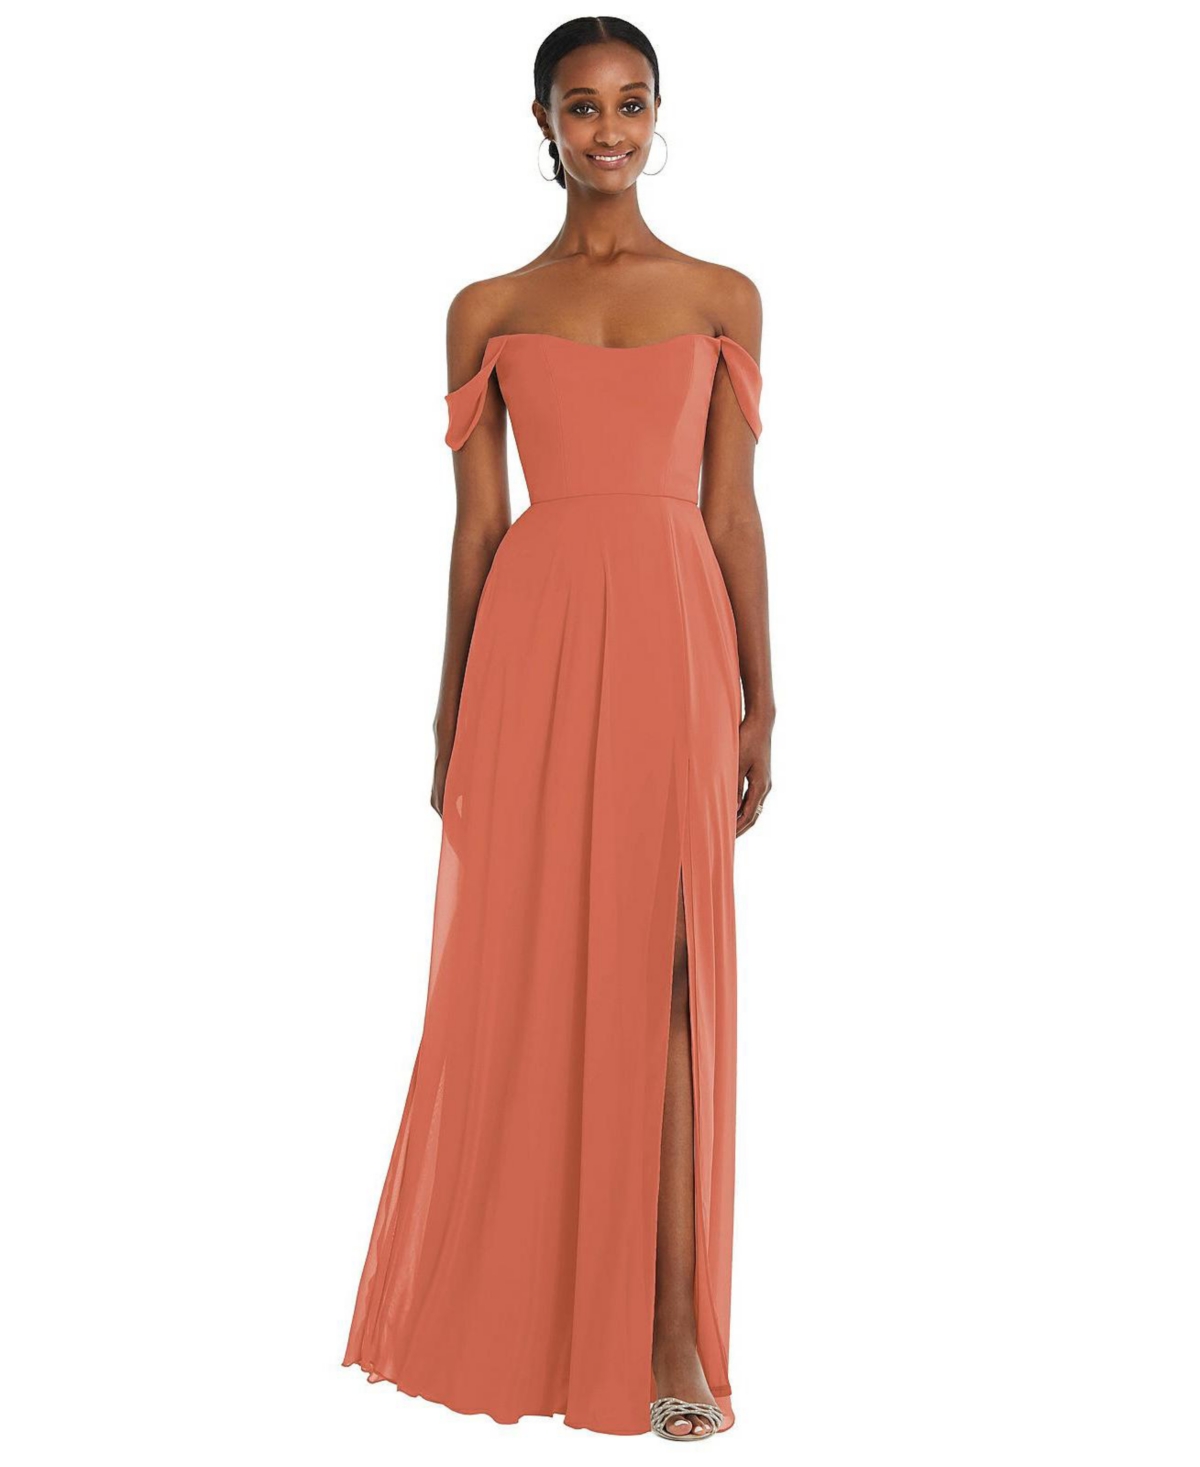 Off-the-Shoulder Basque Neck Maxi Dress with Flounce Sleeves - Tea rose